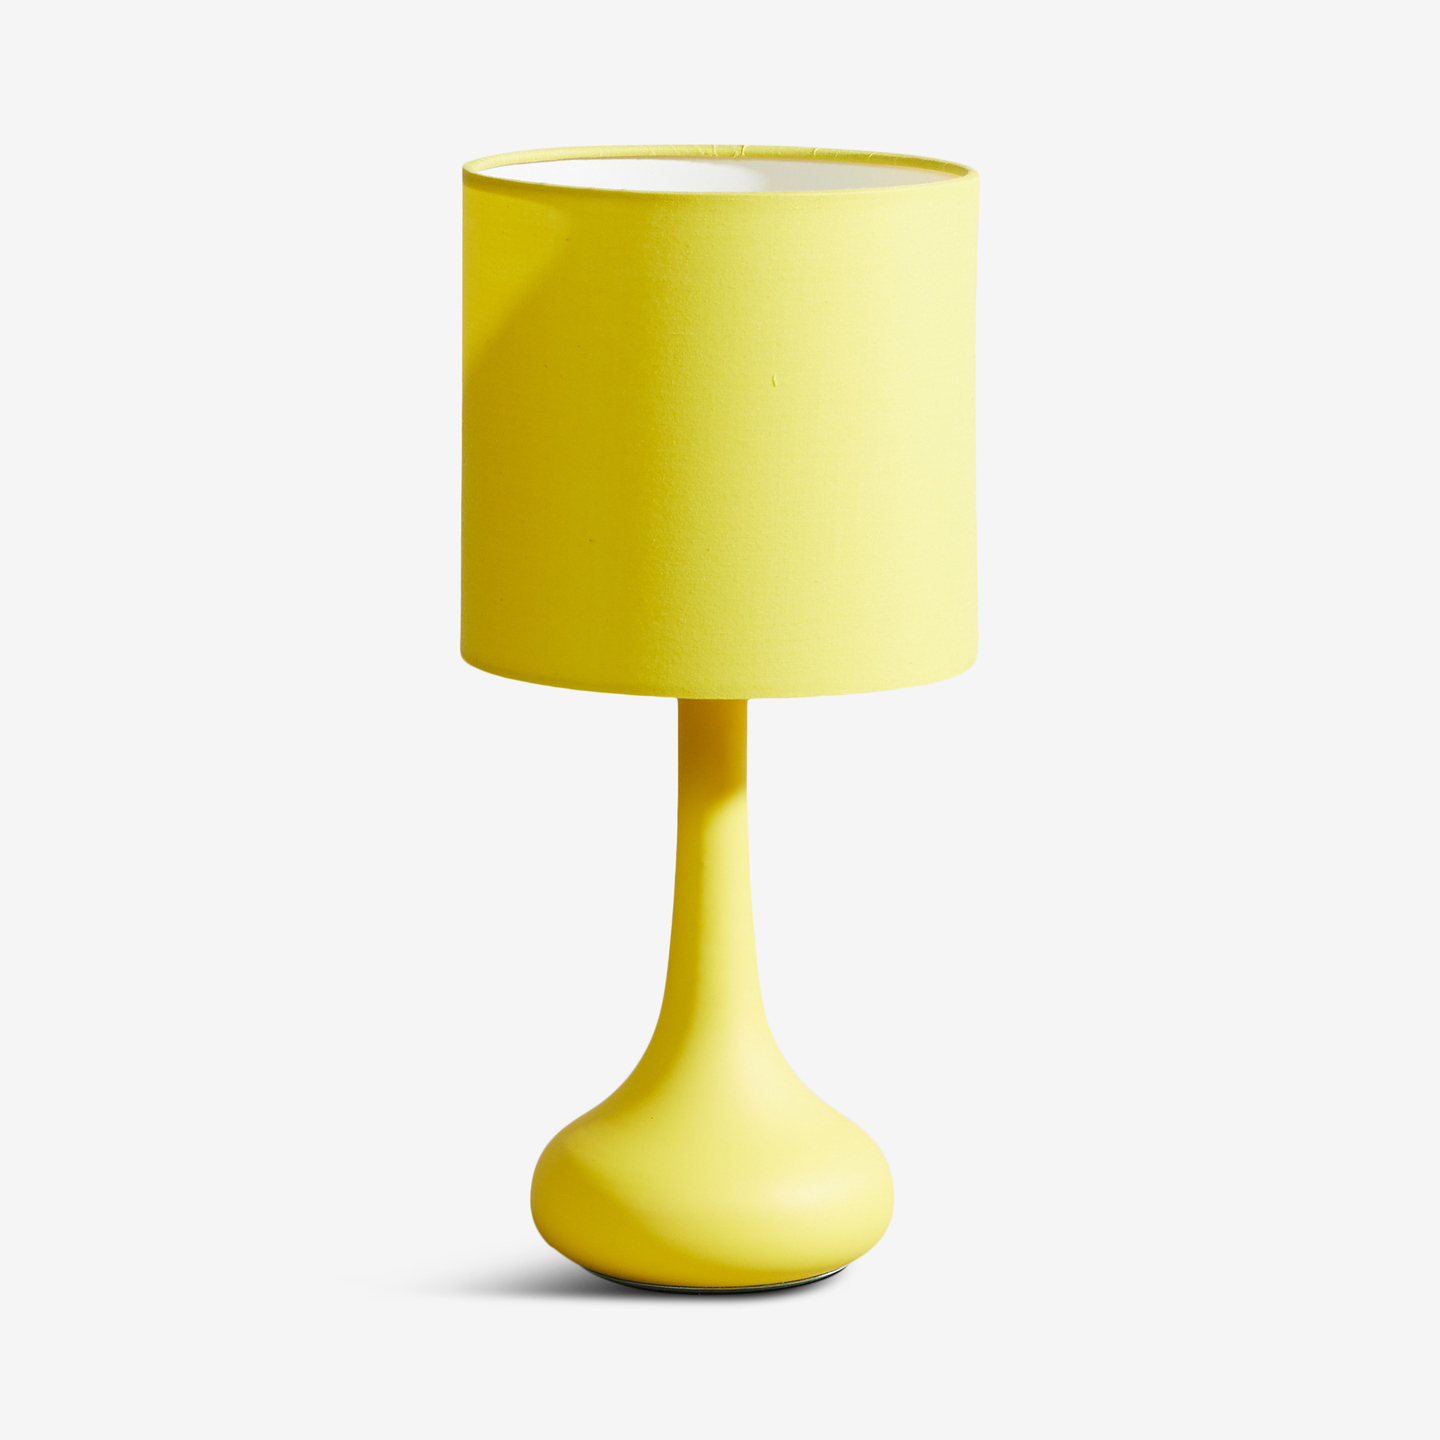 81_Lunar-Table-Lamp-Yellow_Flat-Front 2020